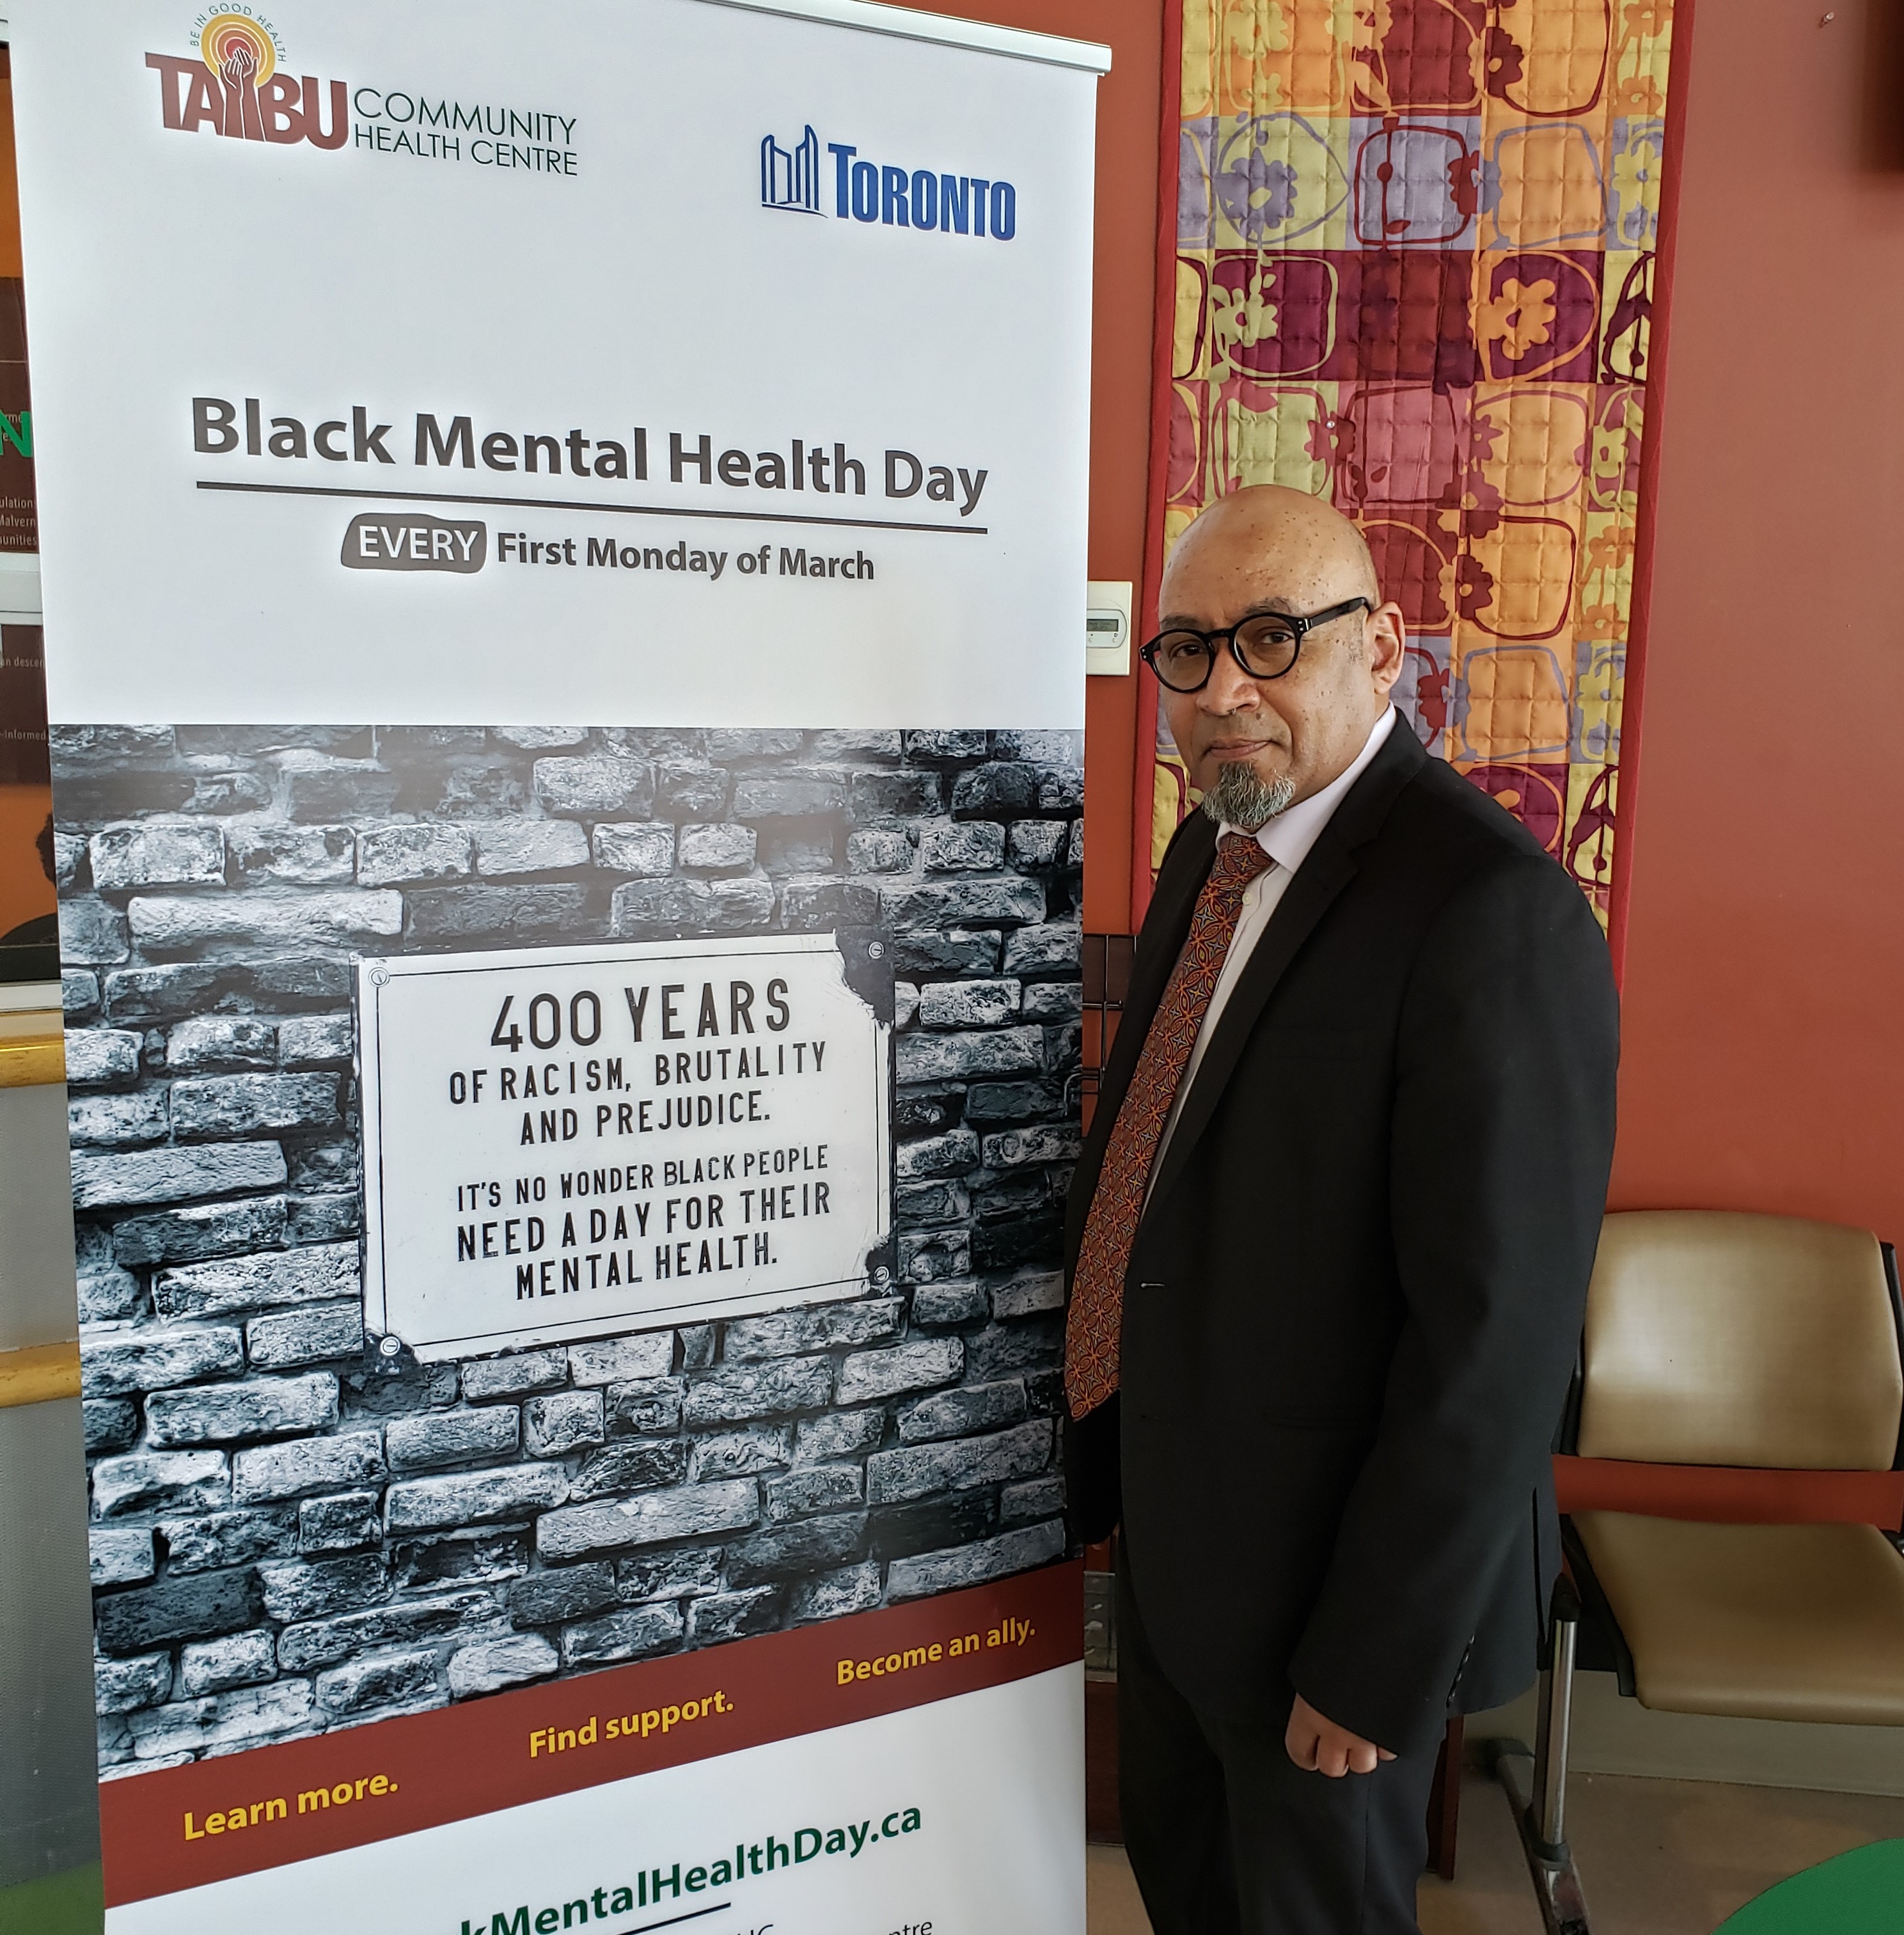 March 2 is now Black Mental Health Day in Toronto